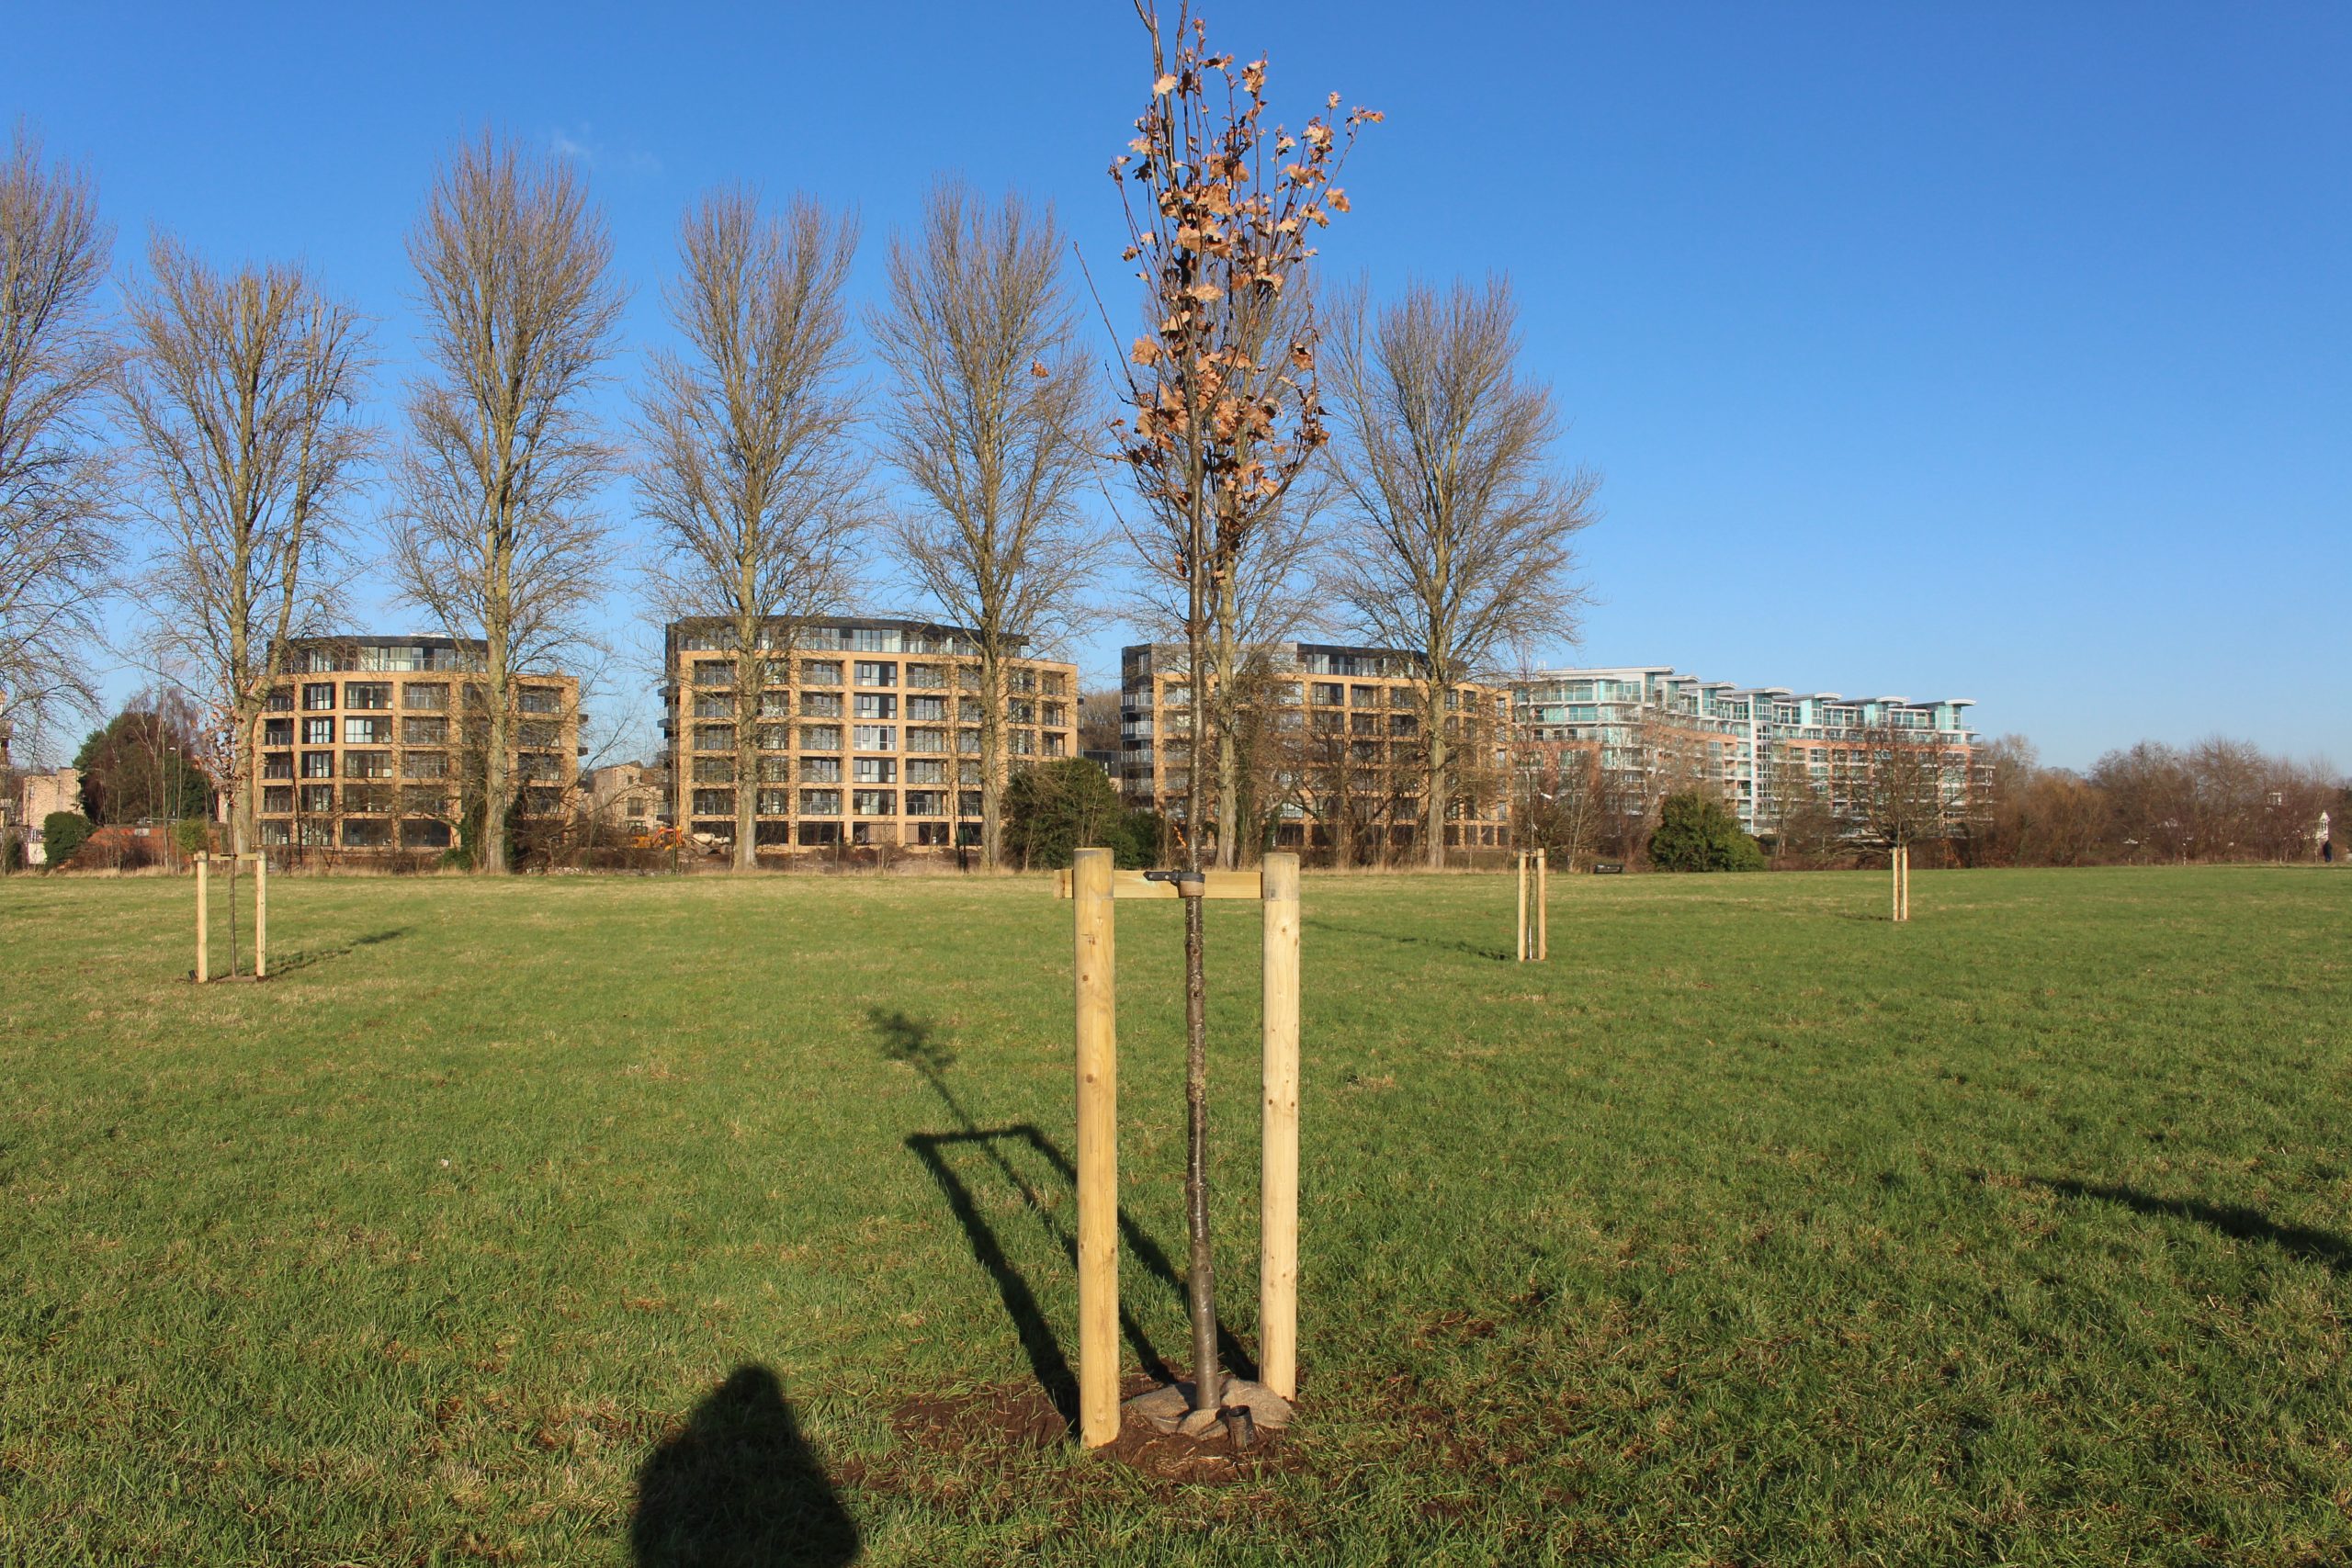 Seven English Oak trees hav been planted in Jubilee Wood representing each decade of the Jubilee scaled